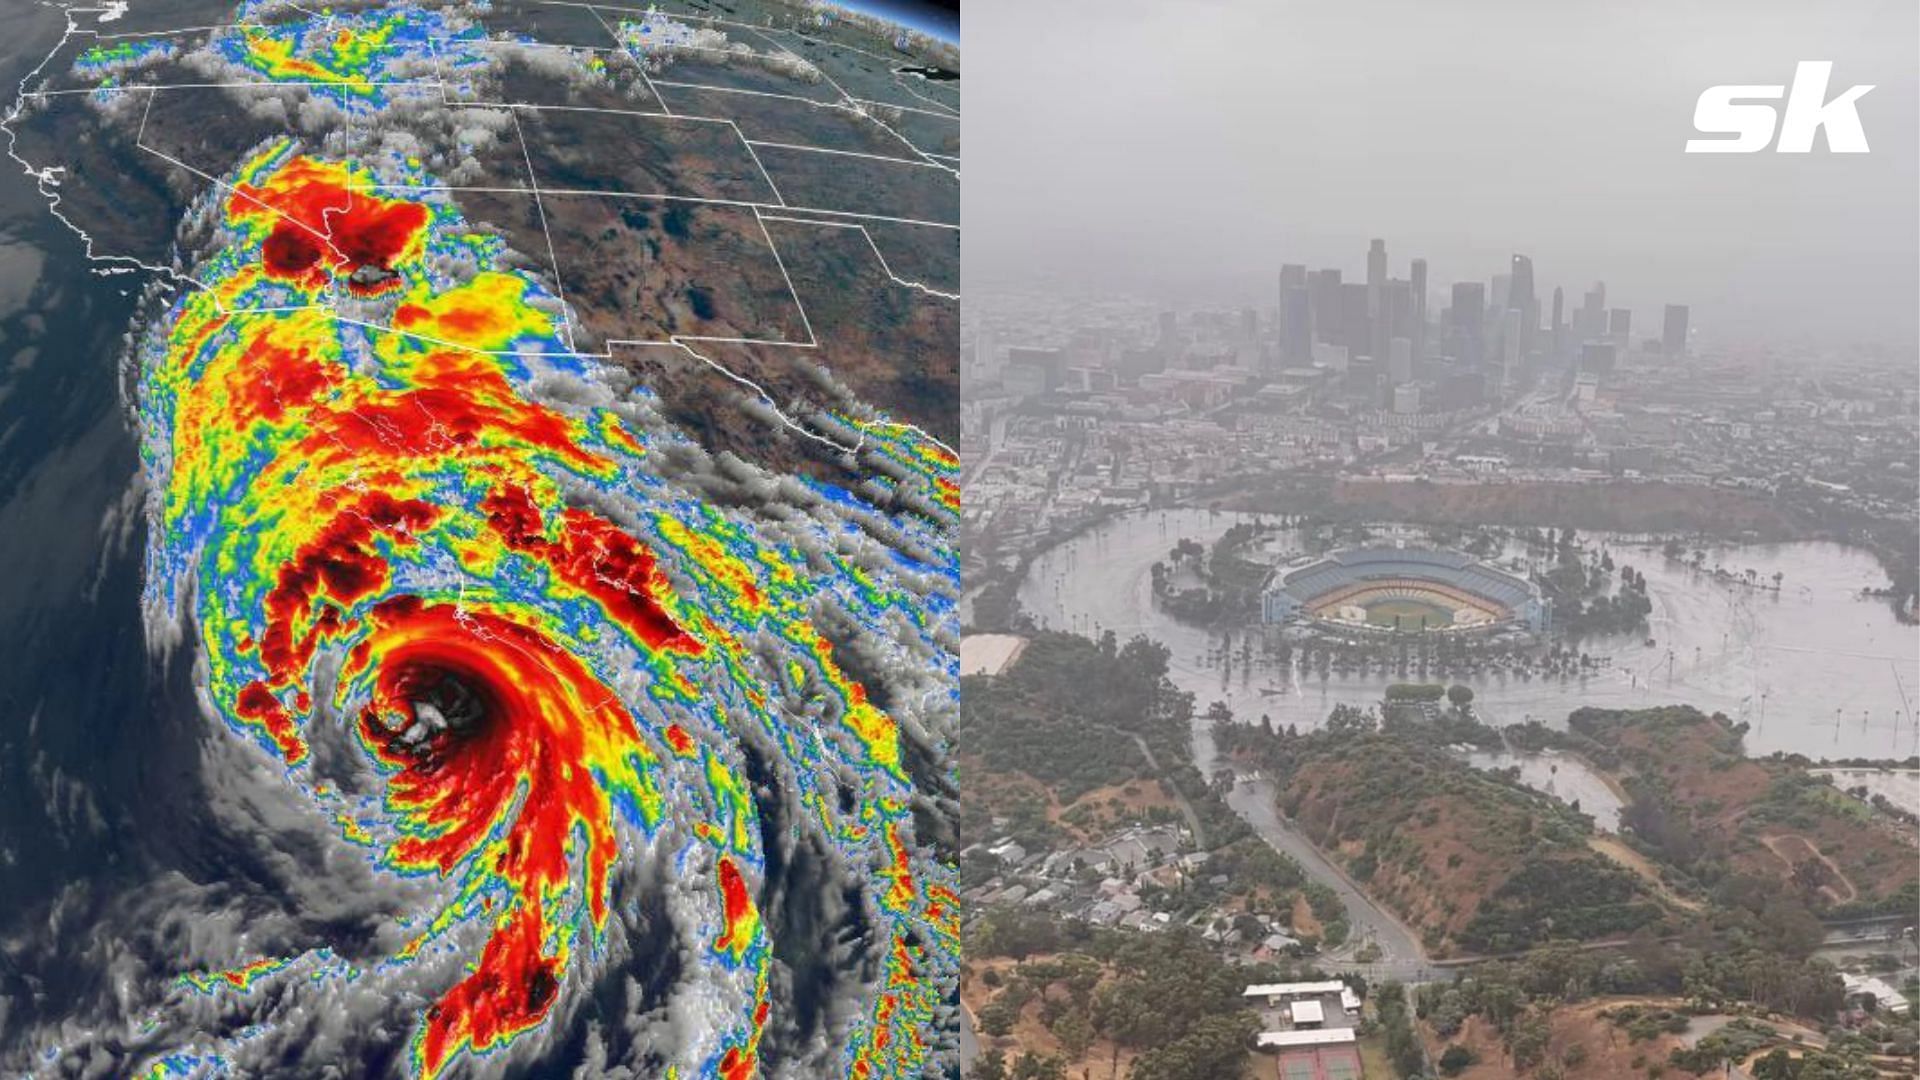 Images of Dodger Stadium after Tropical Storm Hilary are real